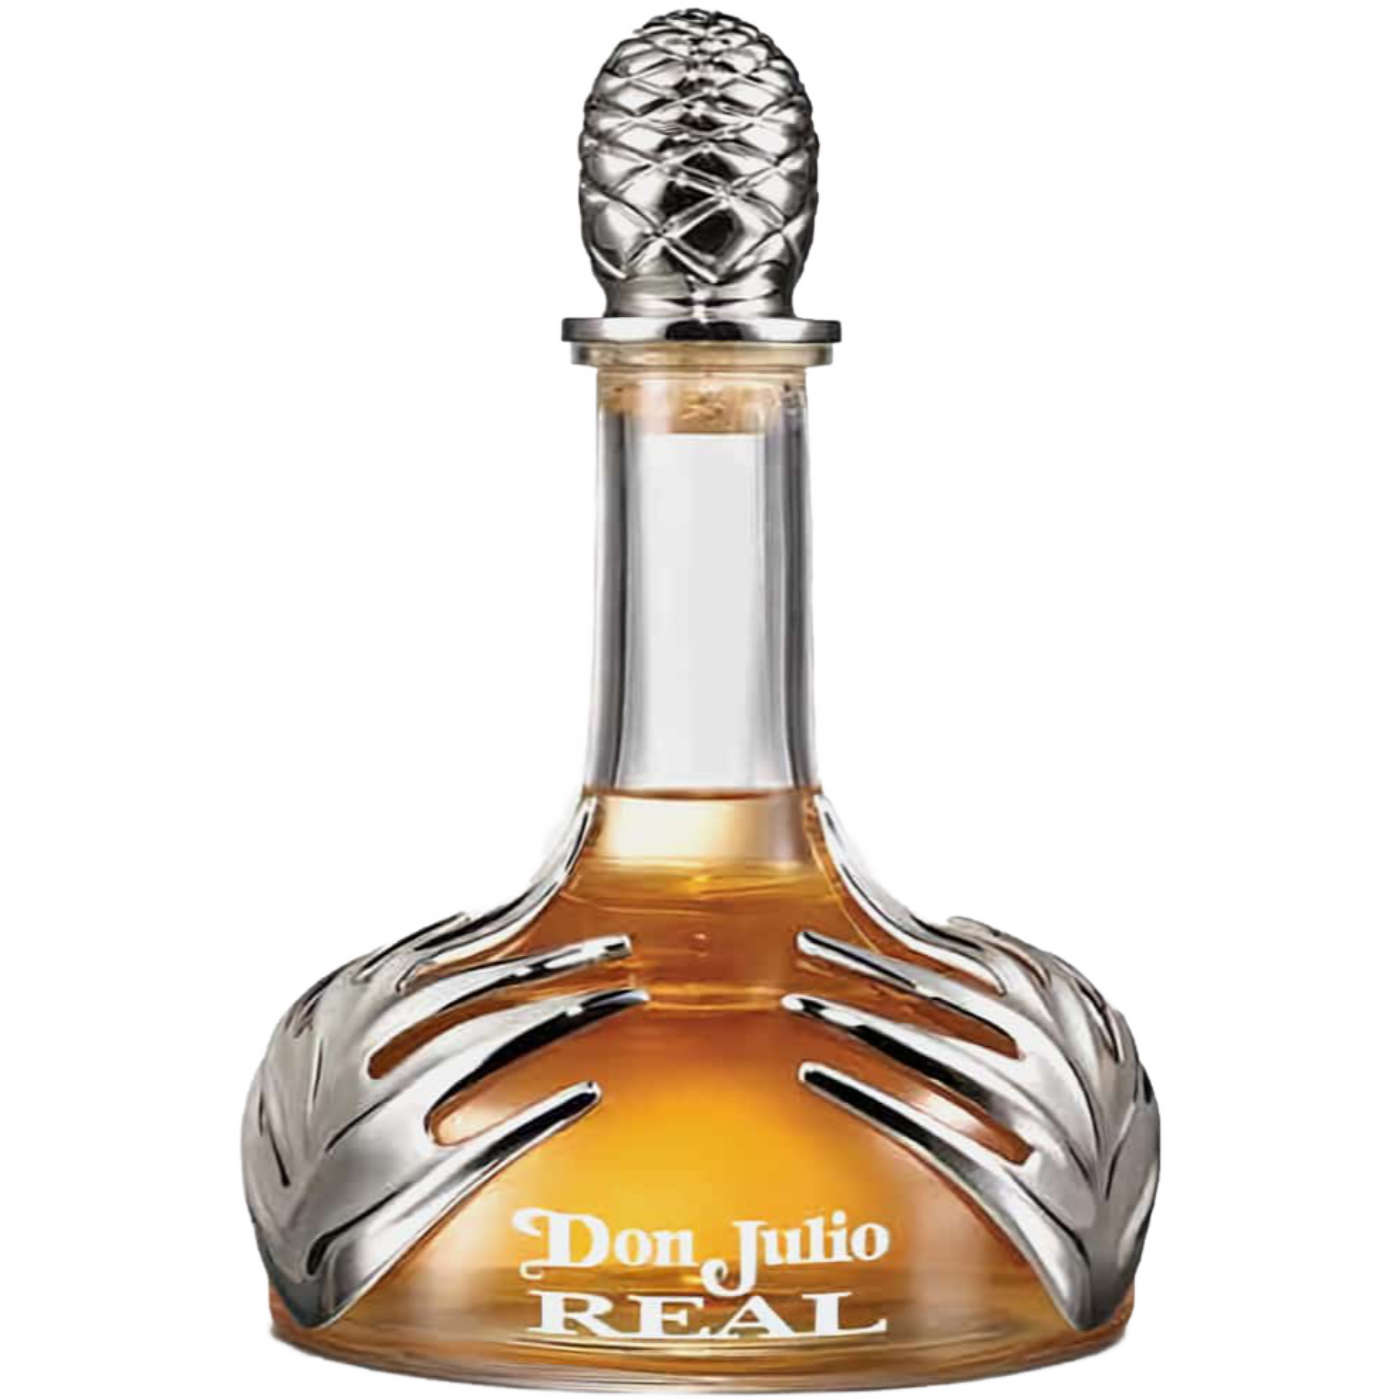 DON JULIO REAL TEQUILA